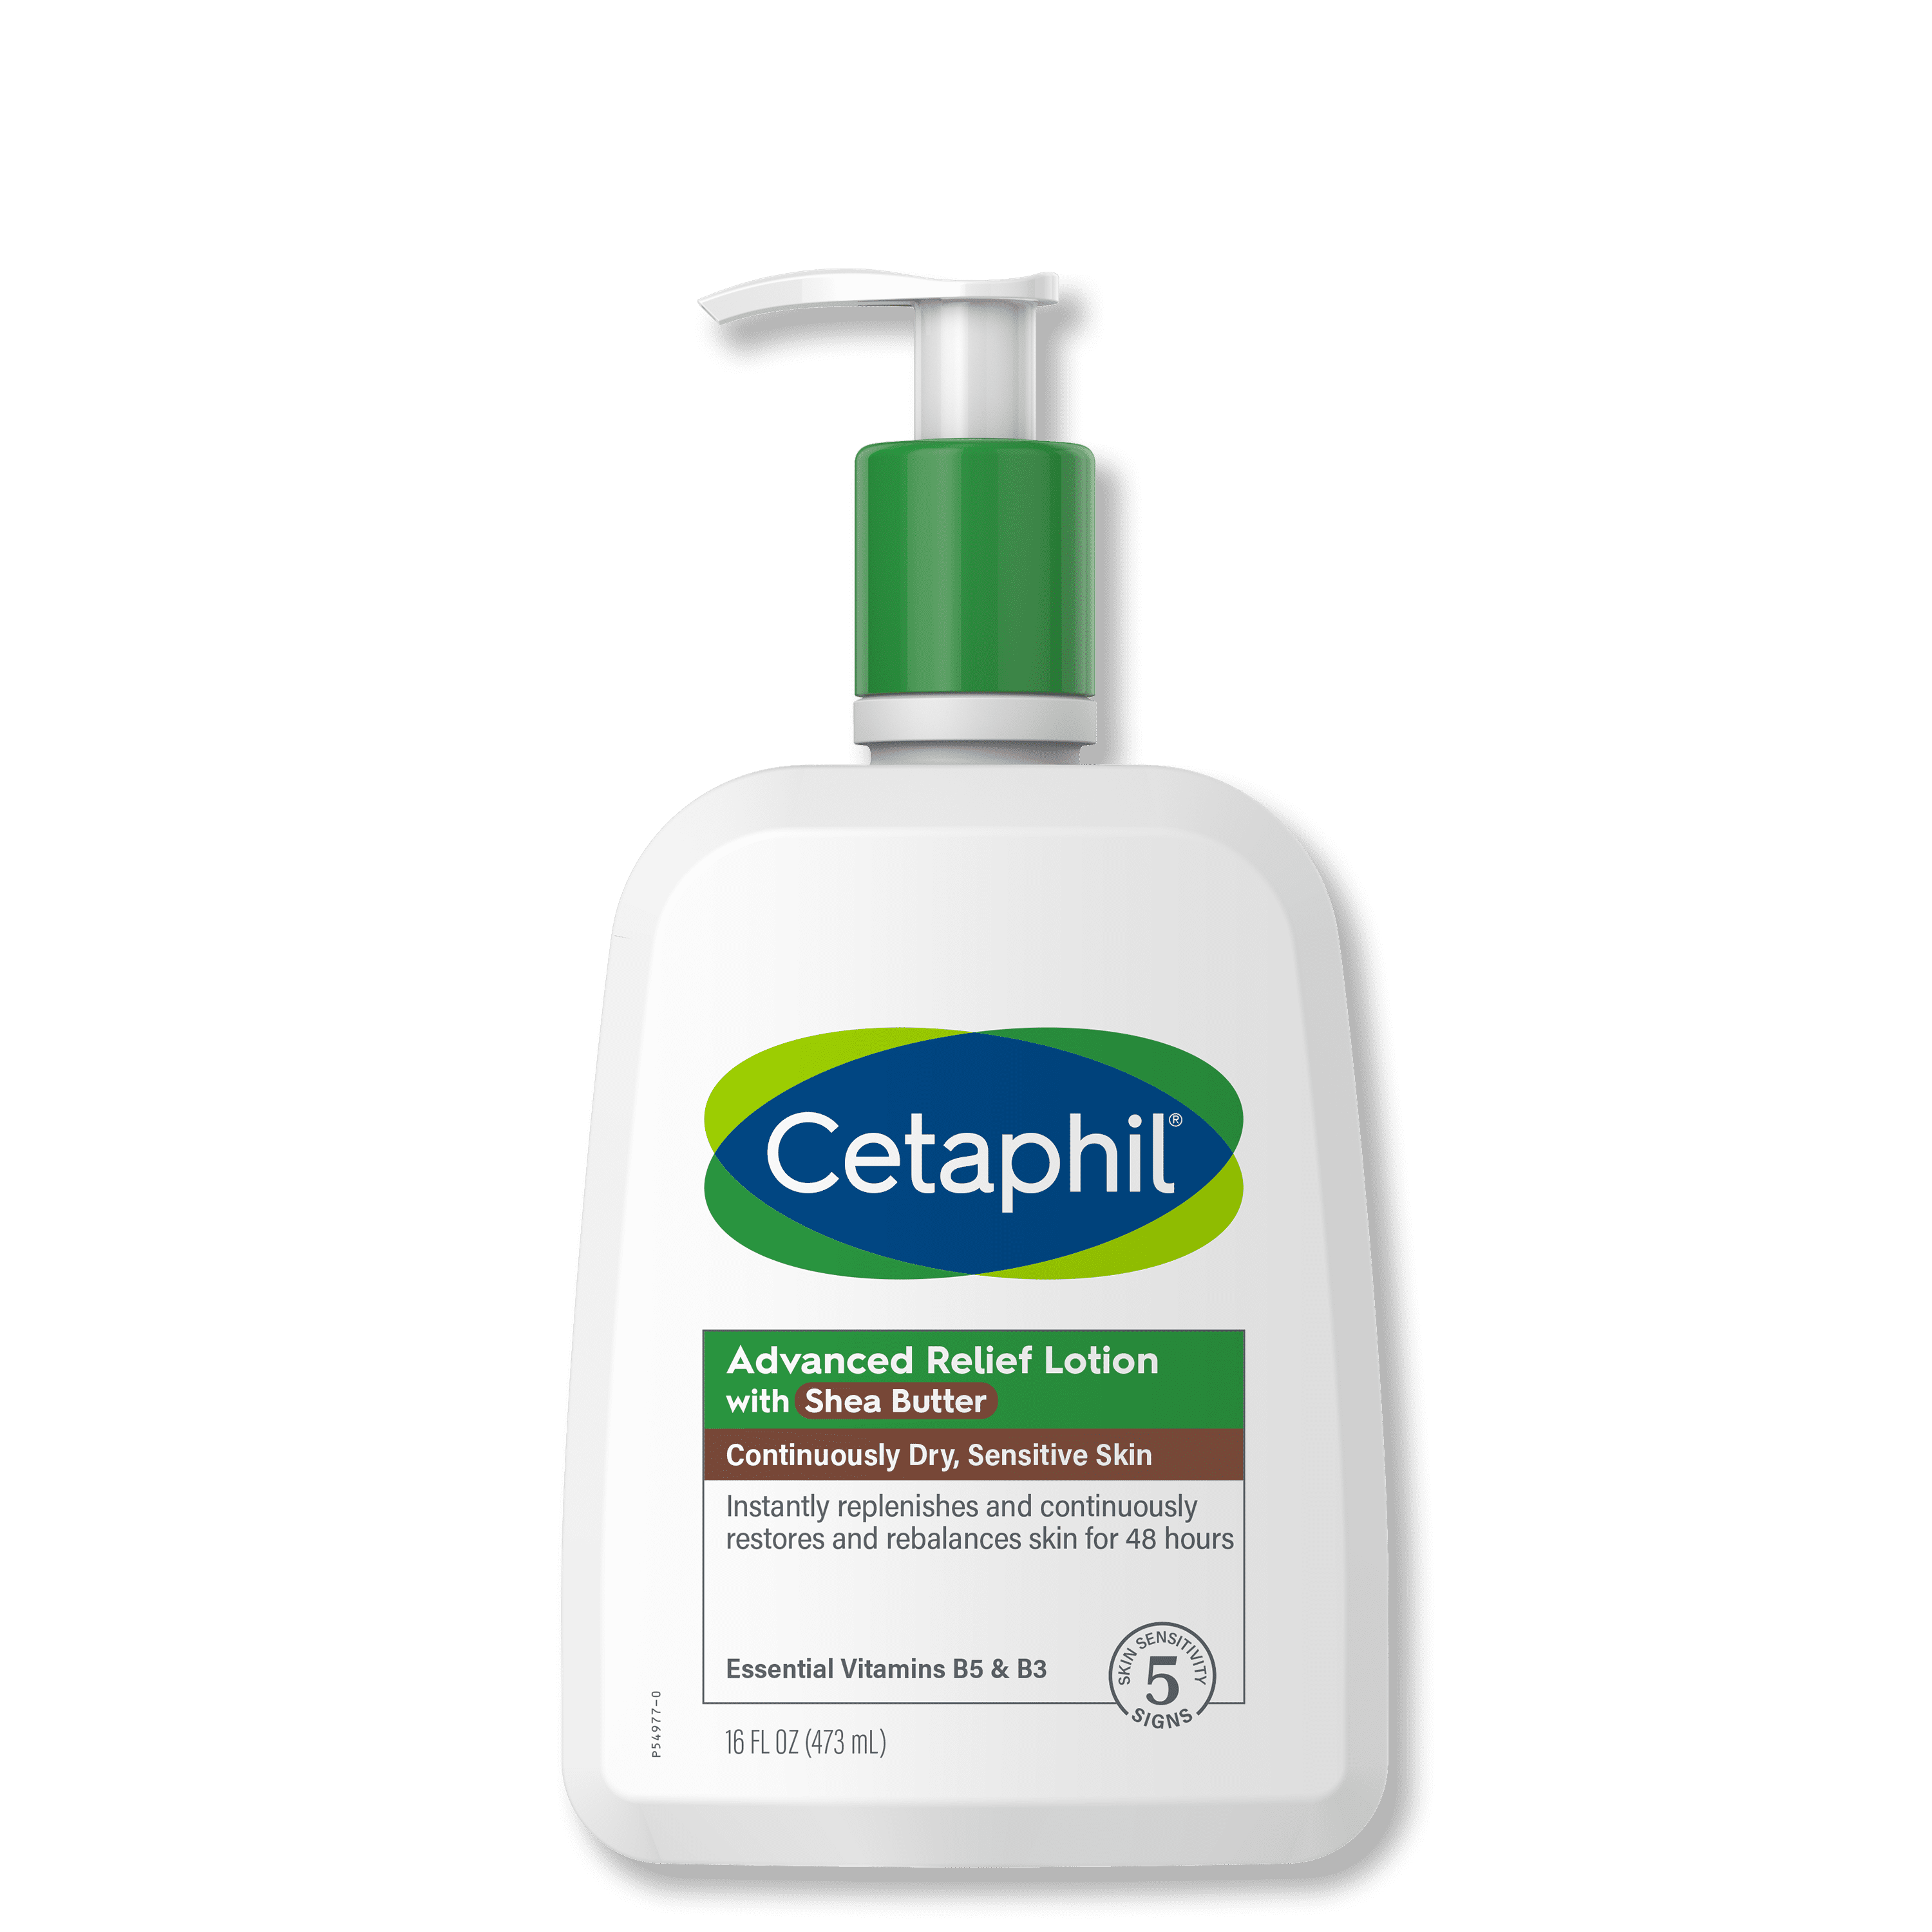 Body Lotion by CETAPHIL, Advanced Relief Lotion with Shea Butter for Dry, Sensitive Skin, 16 oz, Fragrance Free, Hypoallergenic, Non-Comedogenic